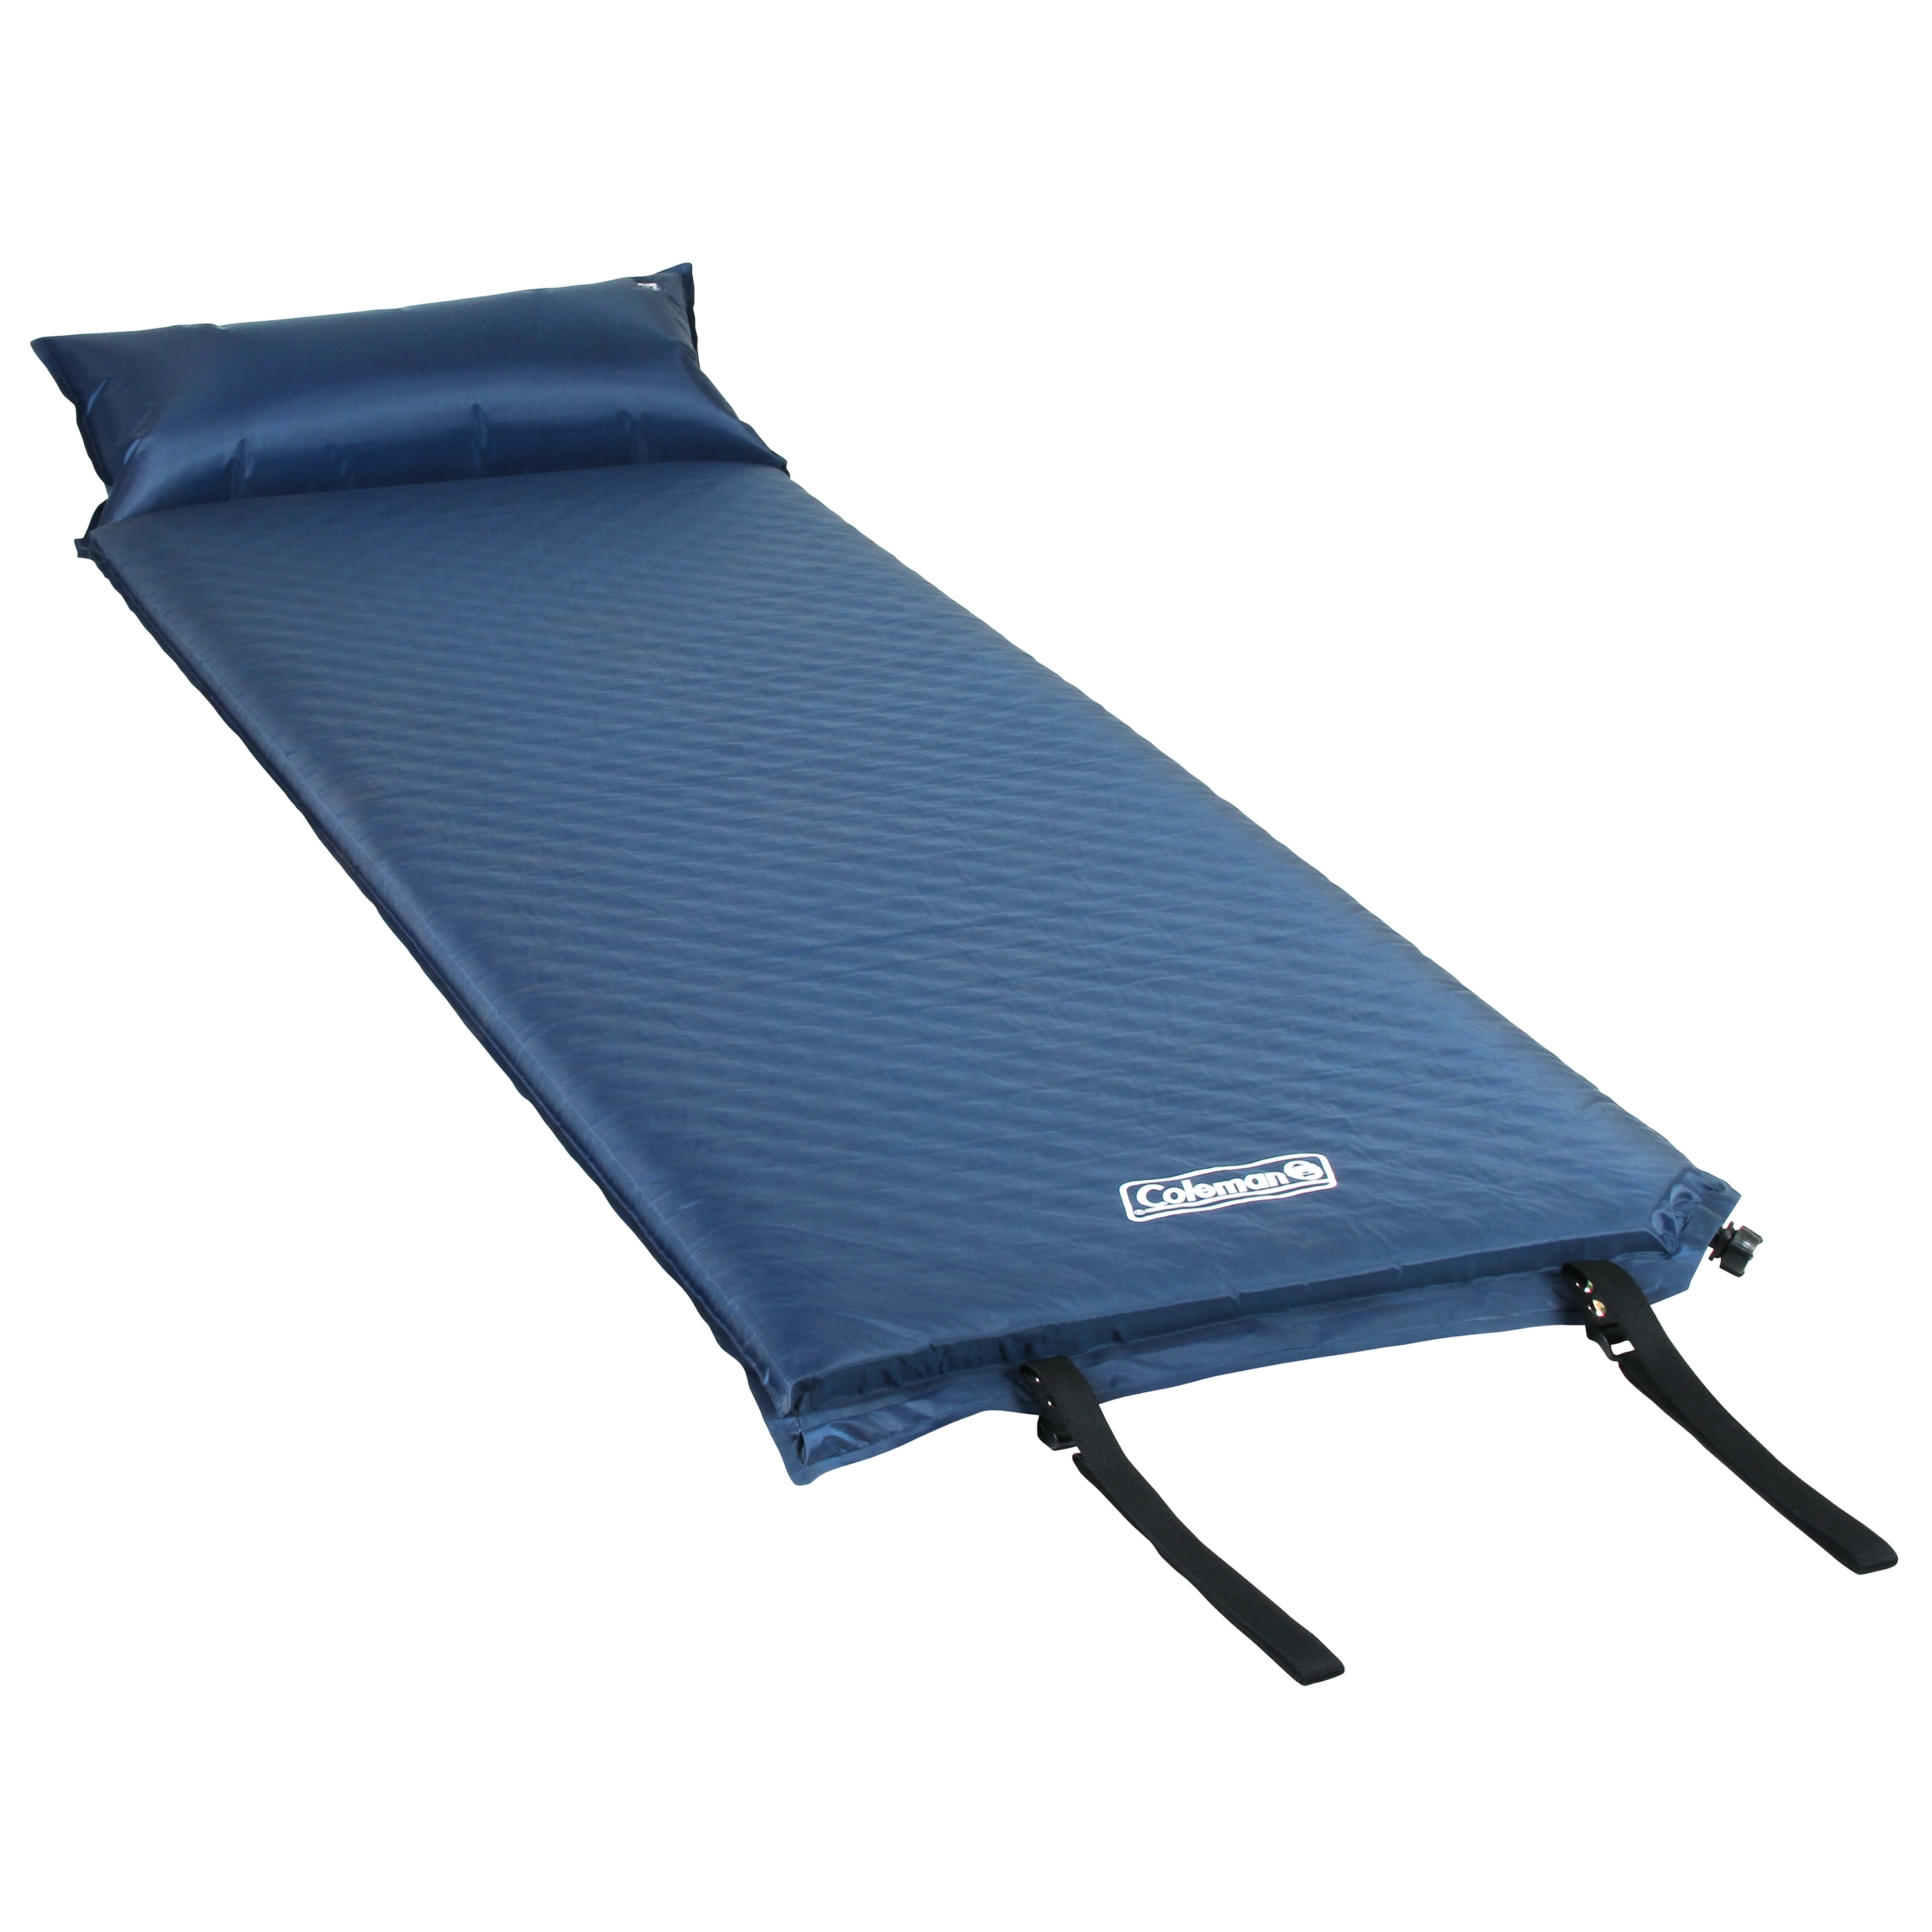 Coleman Self-Inflating Sleeping Camp Pad with Pillow, 76" x 25" - image 3 of 6